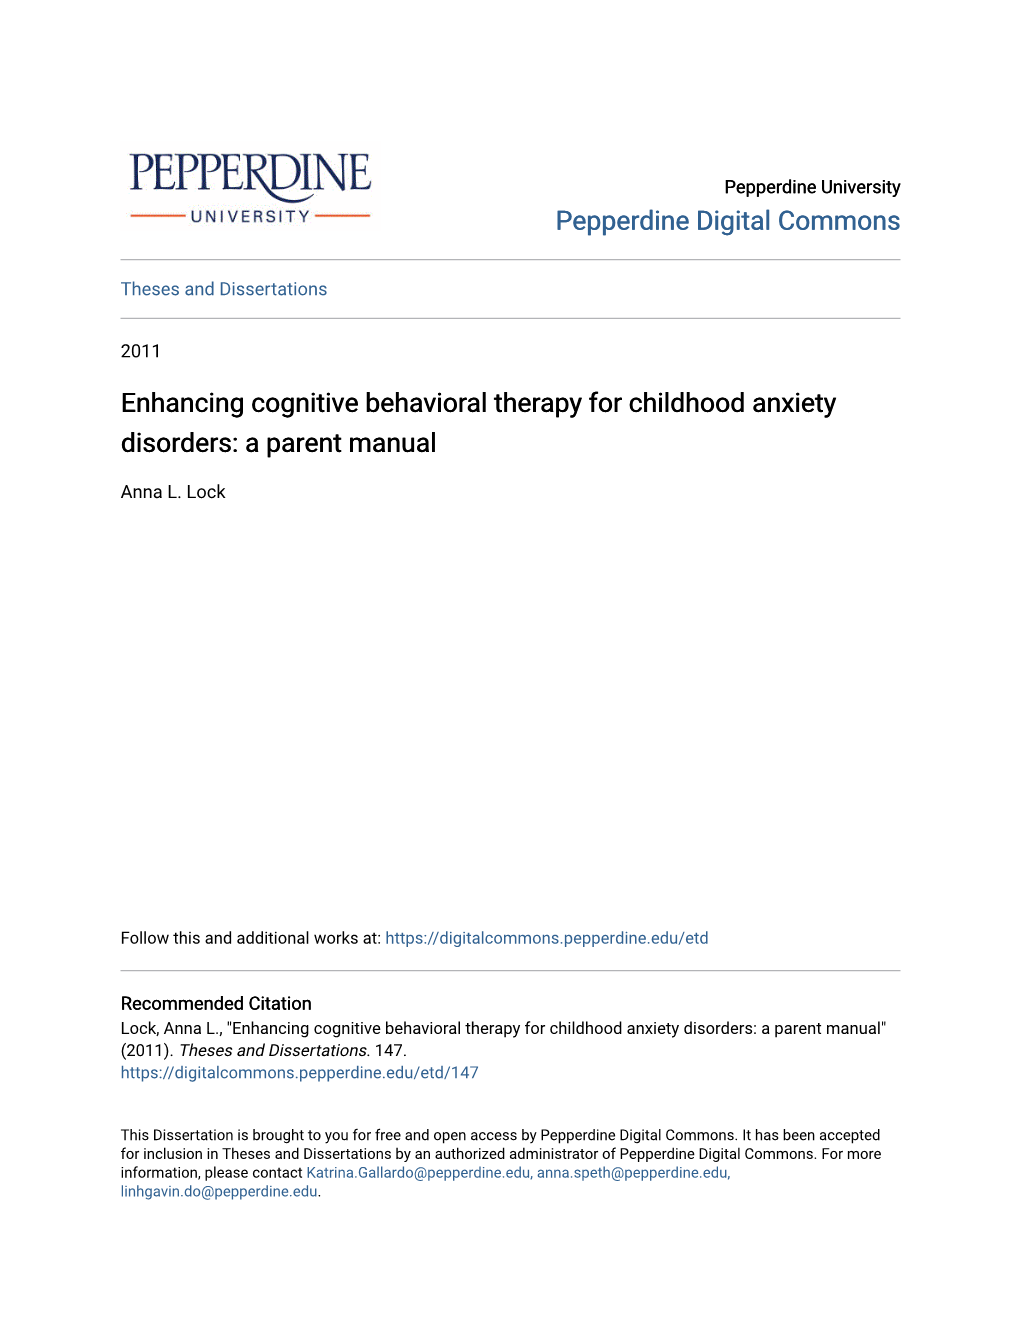 Enhancing Cognitive Behavioral Therapy for Childhood Anxiety Disorders: a Parent Manual